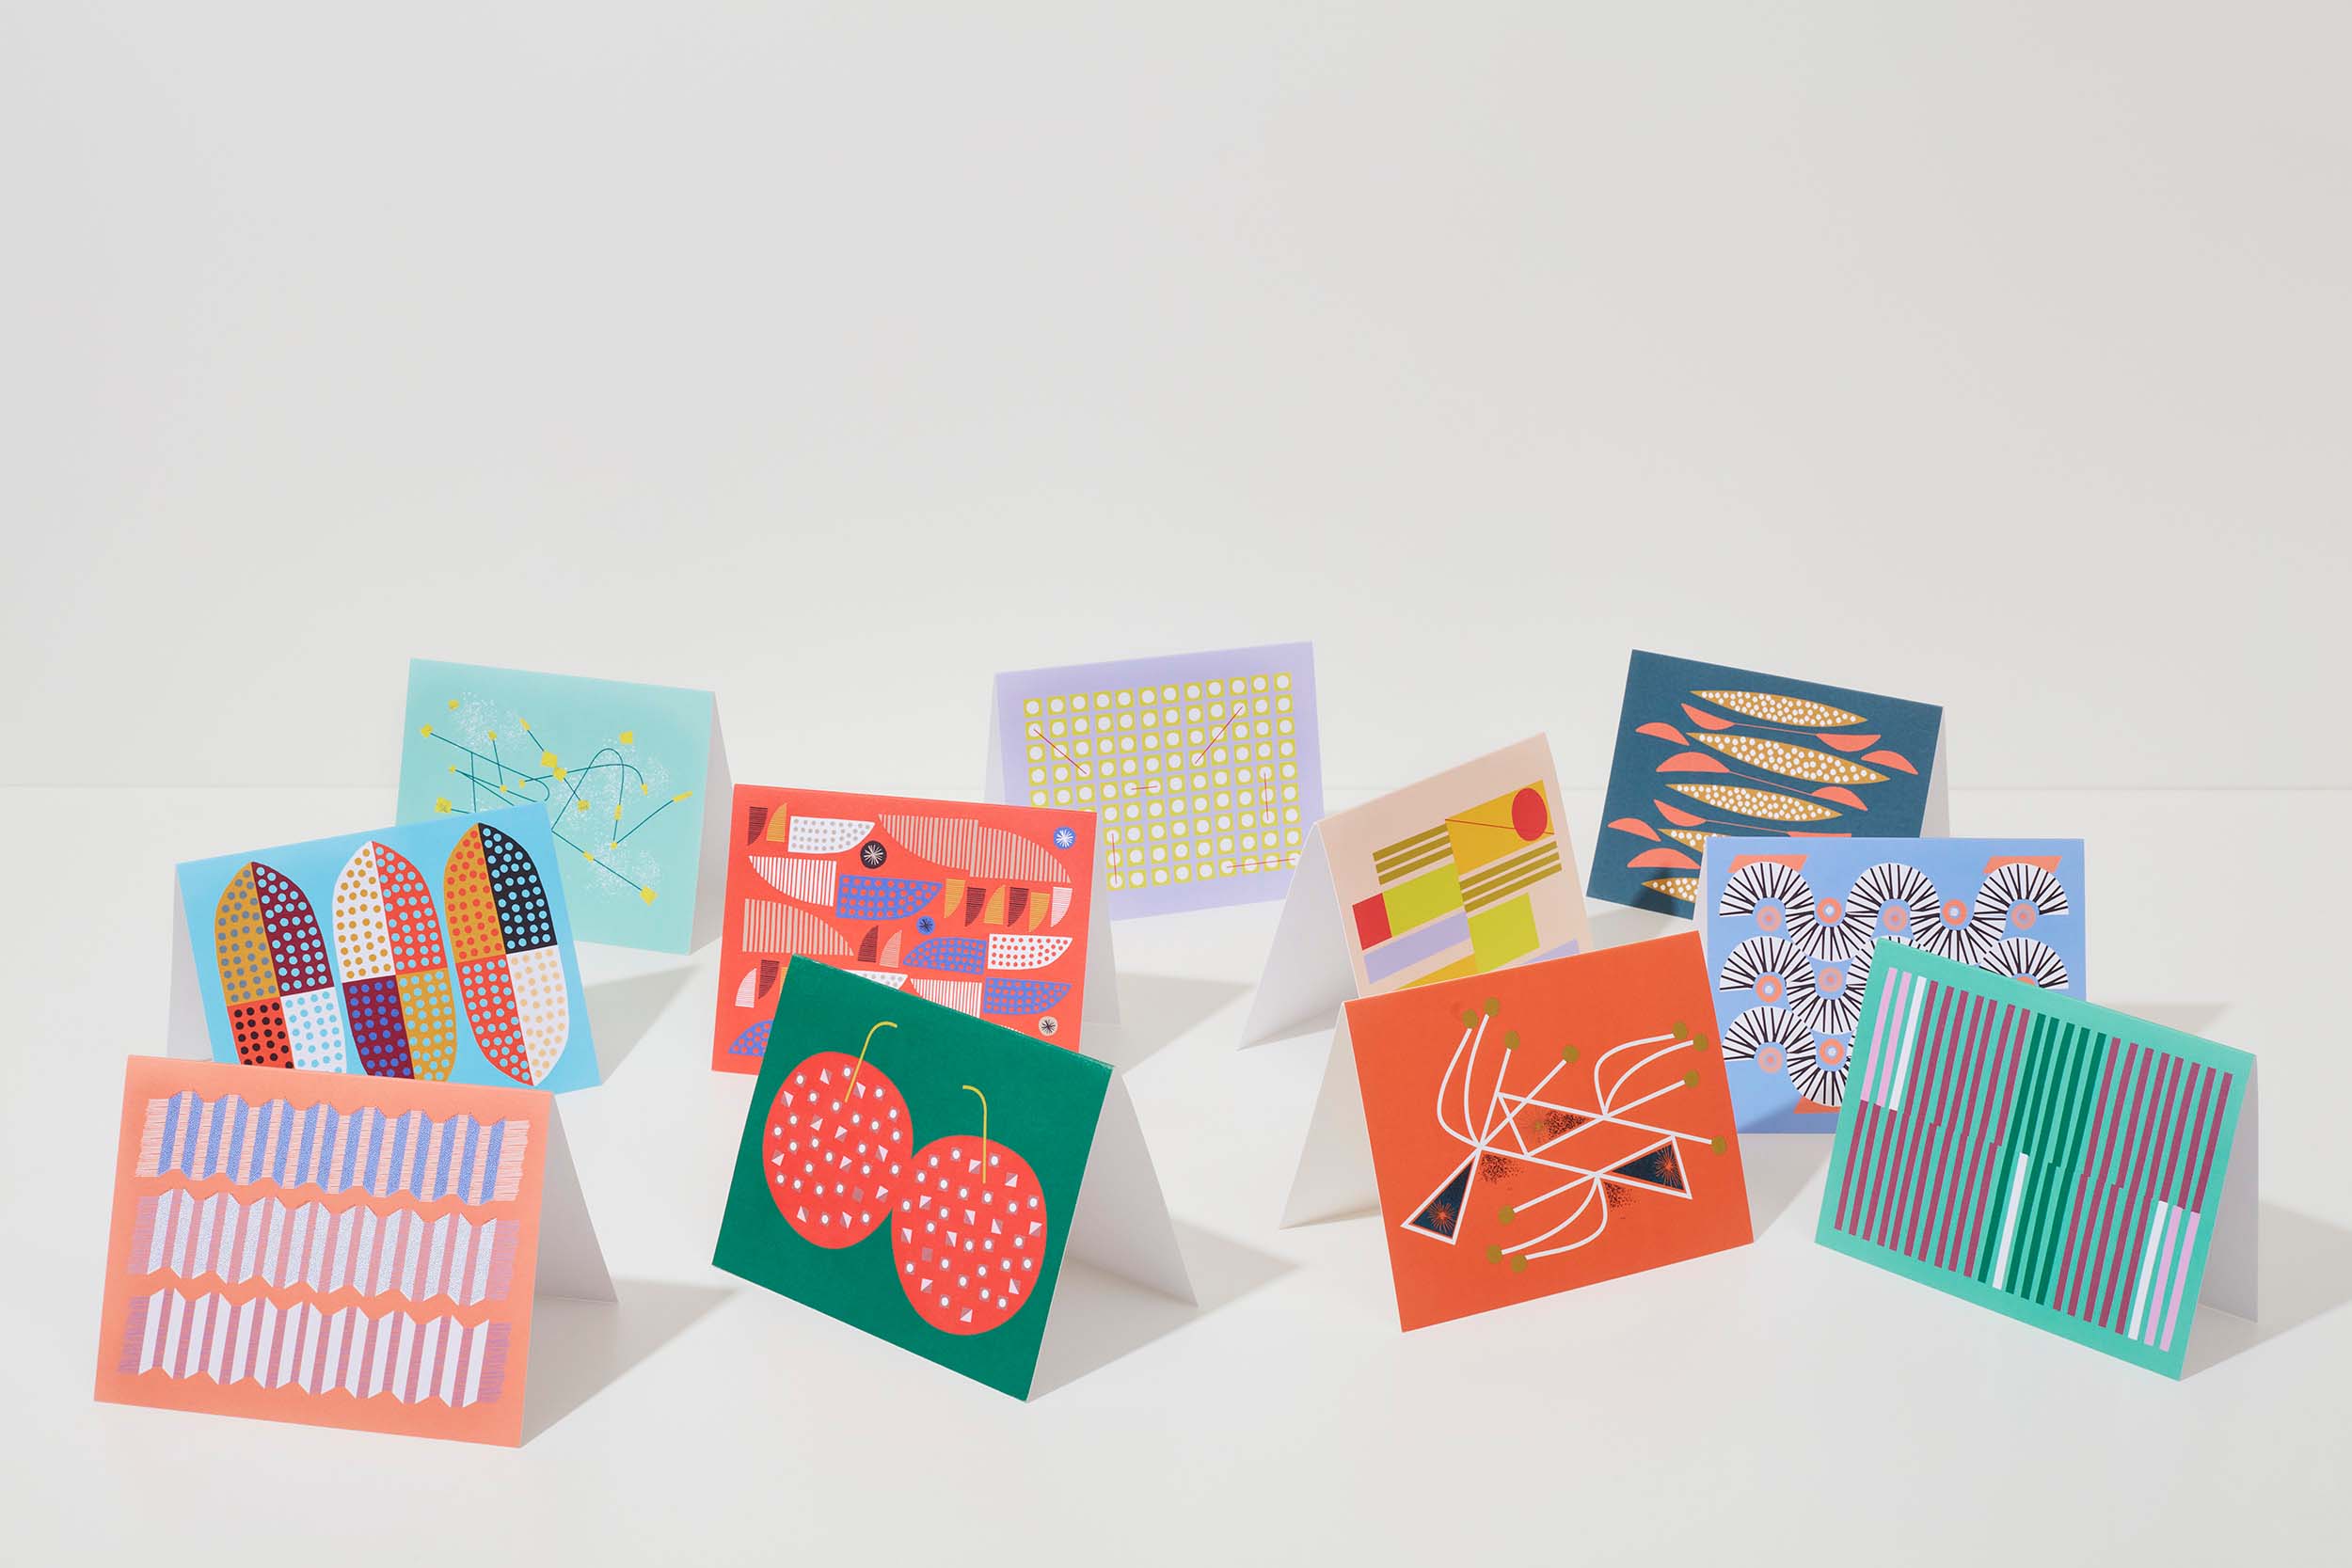 A group of colourful, graphic greeting cards on a table, by Mezzaluna Studio